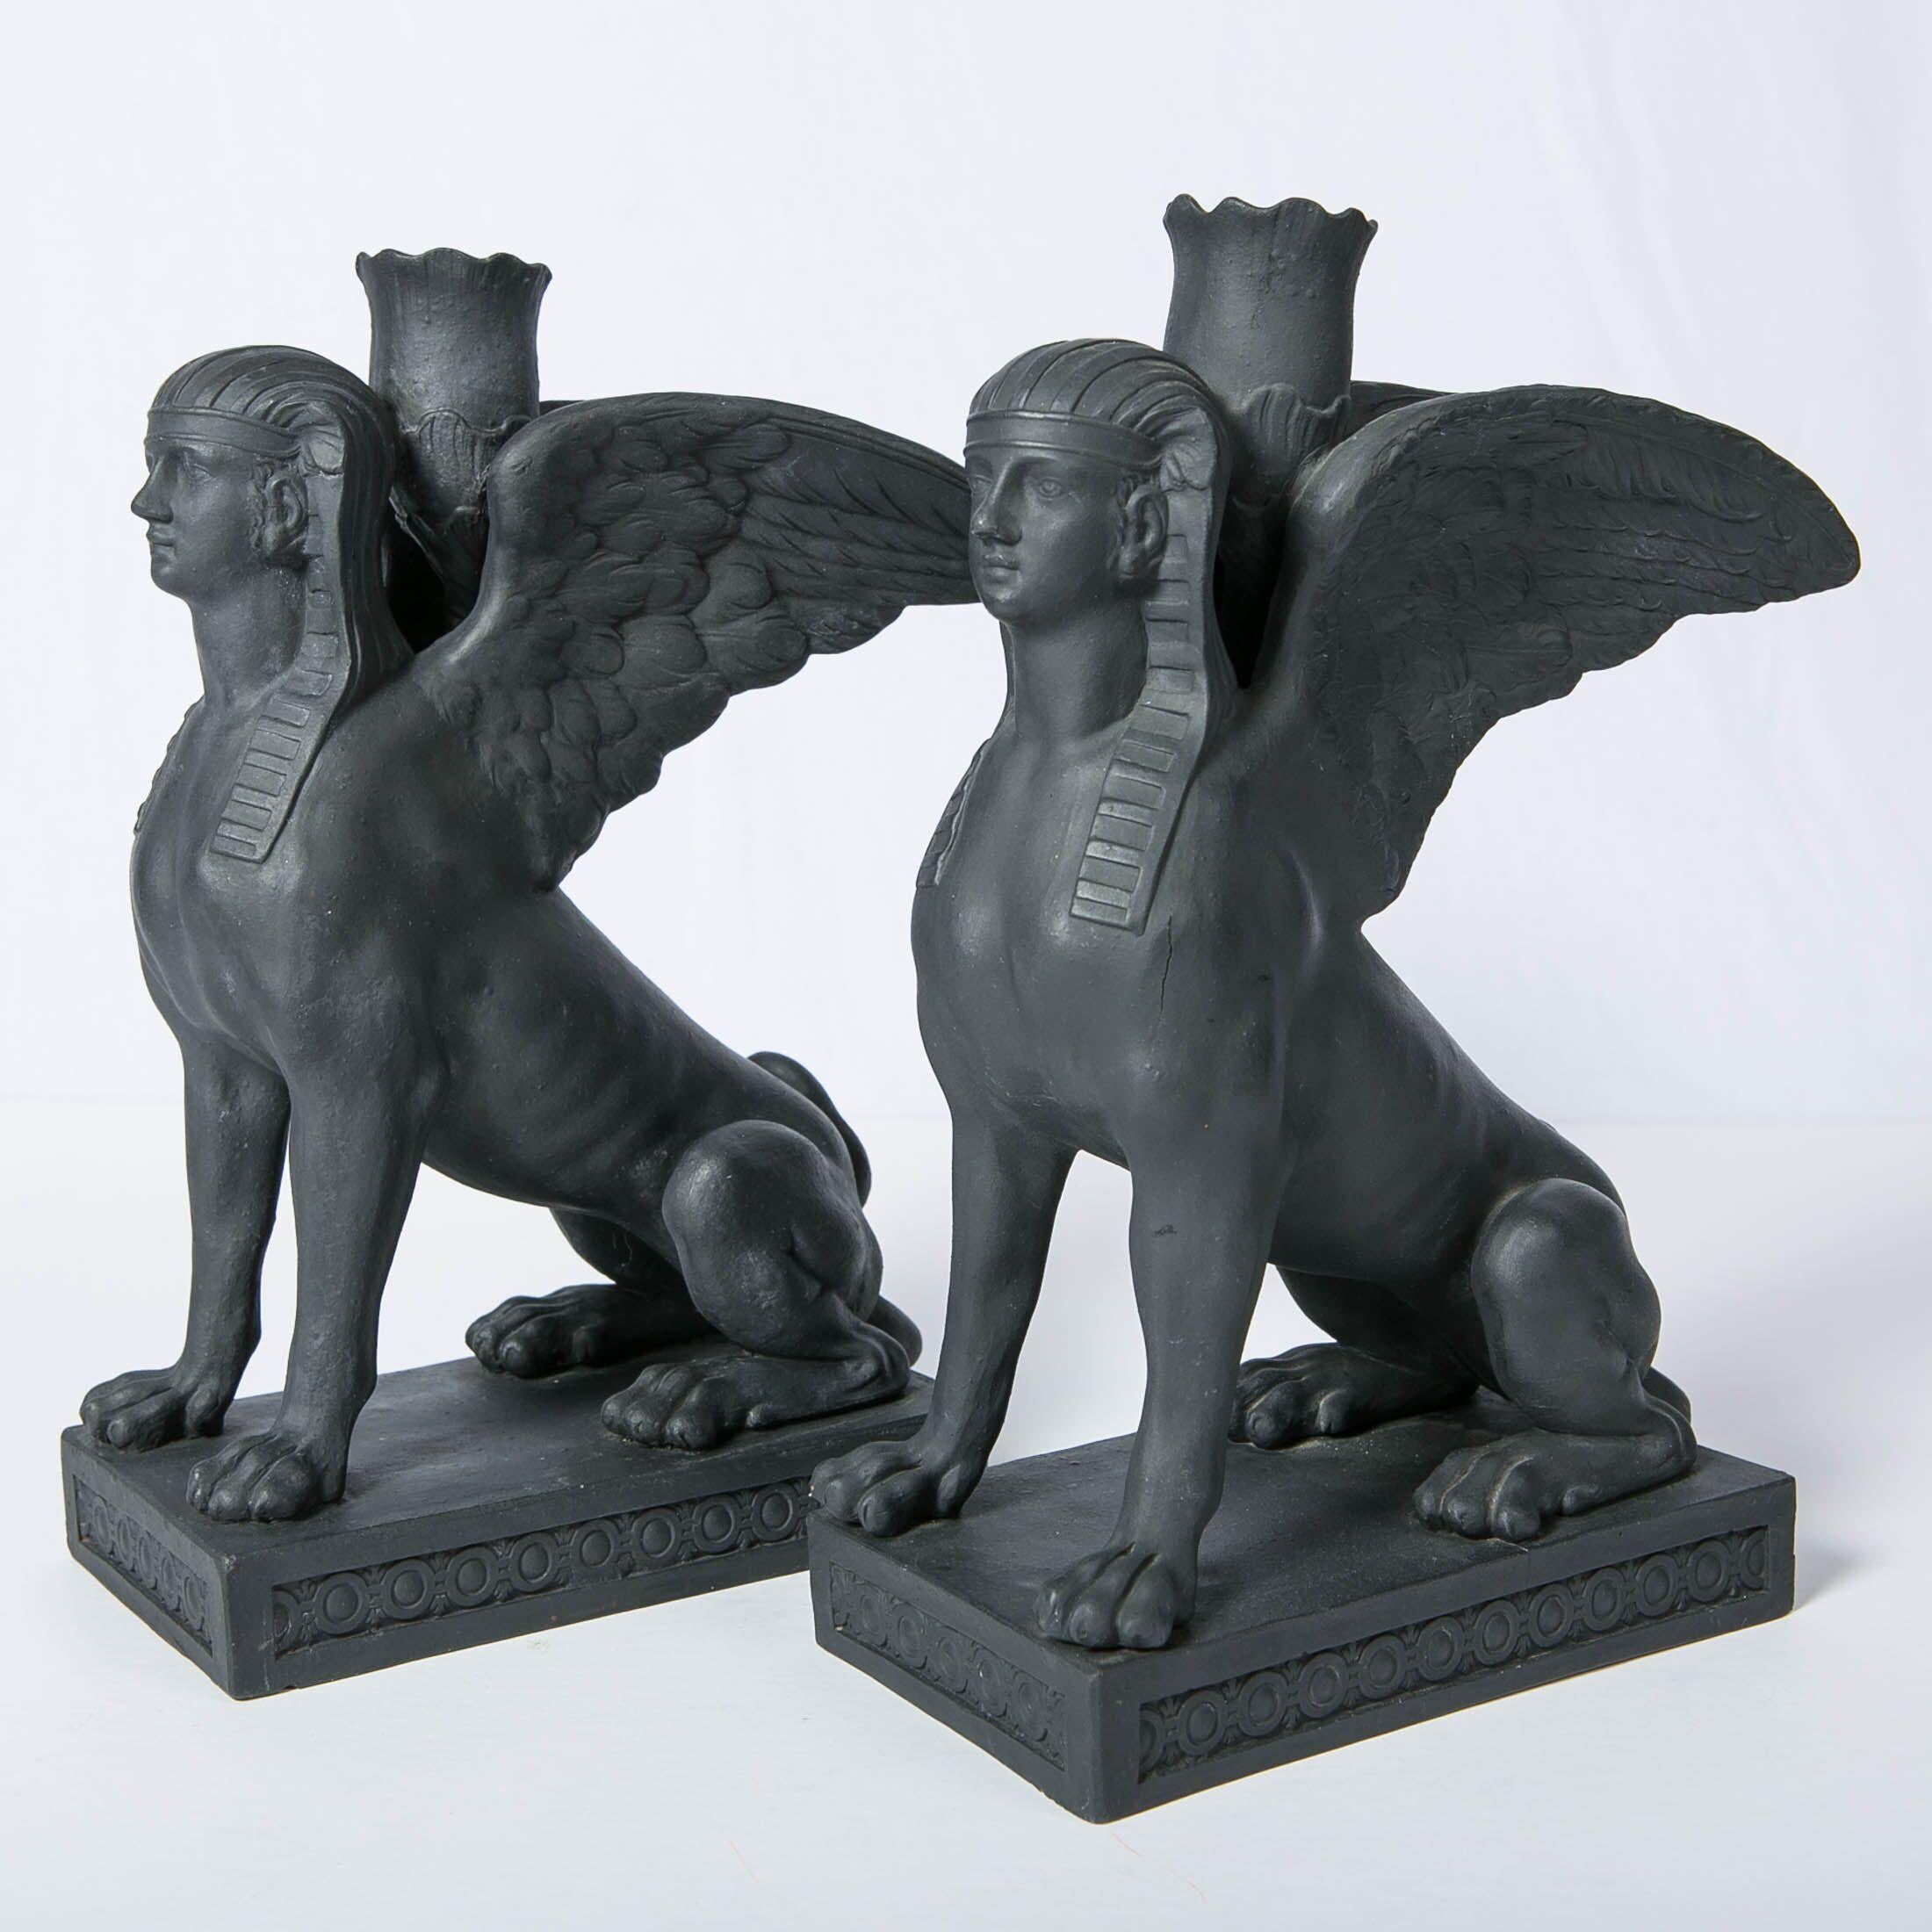 English Pair of Wedgwood Egyptian Revival Black Basalt Sphinxes Made 18th Century